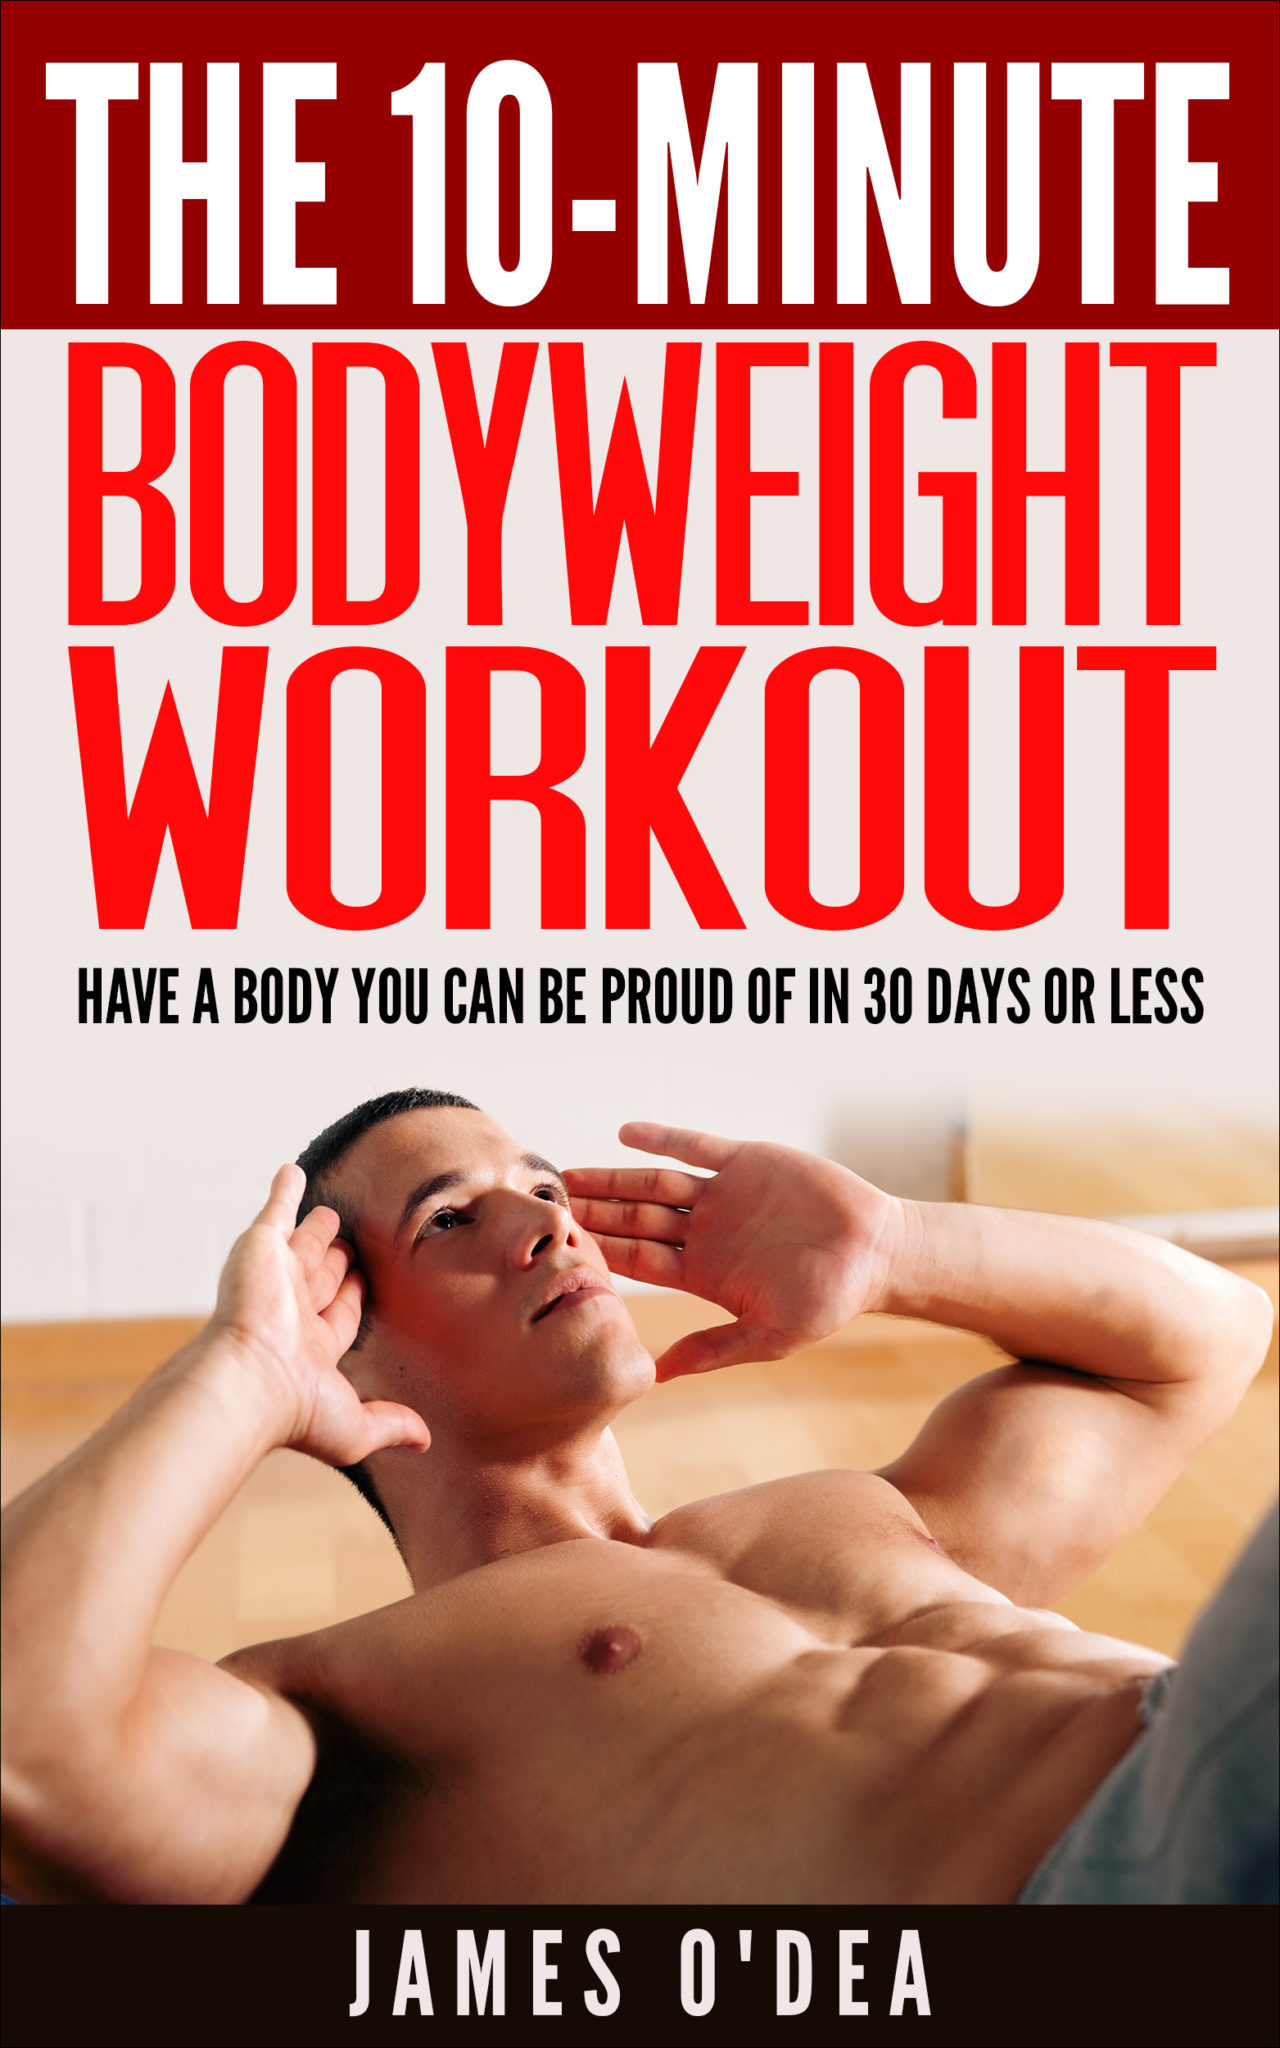 FREE: The 10-Minute Bodyweight Workout: Have a Body You can be Proud Of In 30 Days Or Less by James O’Dea